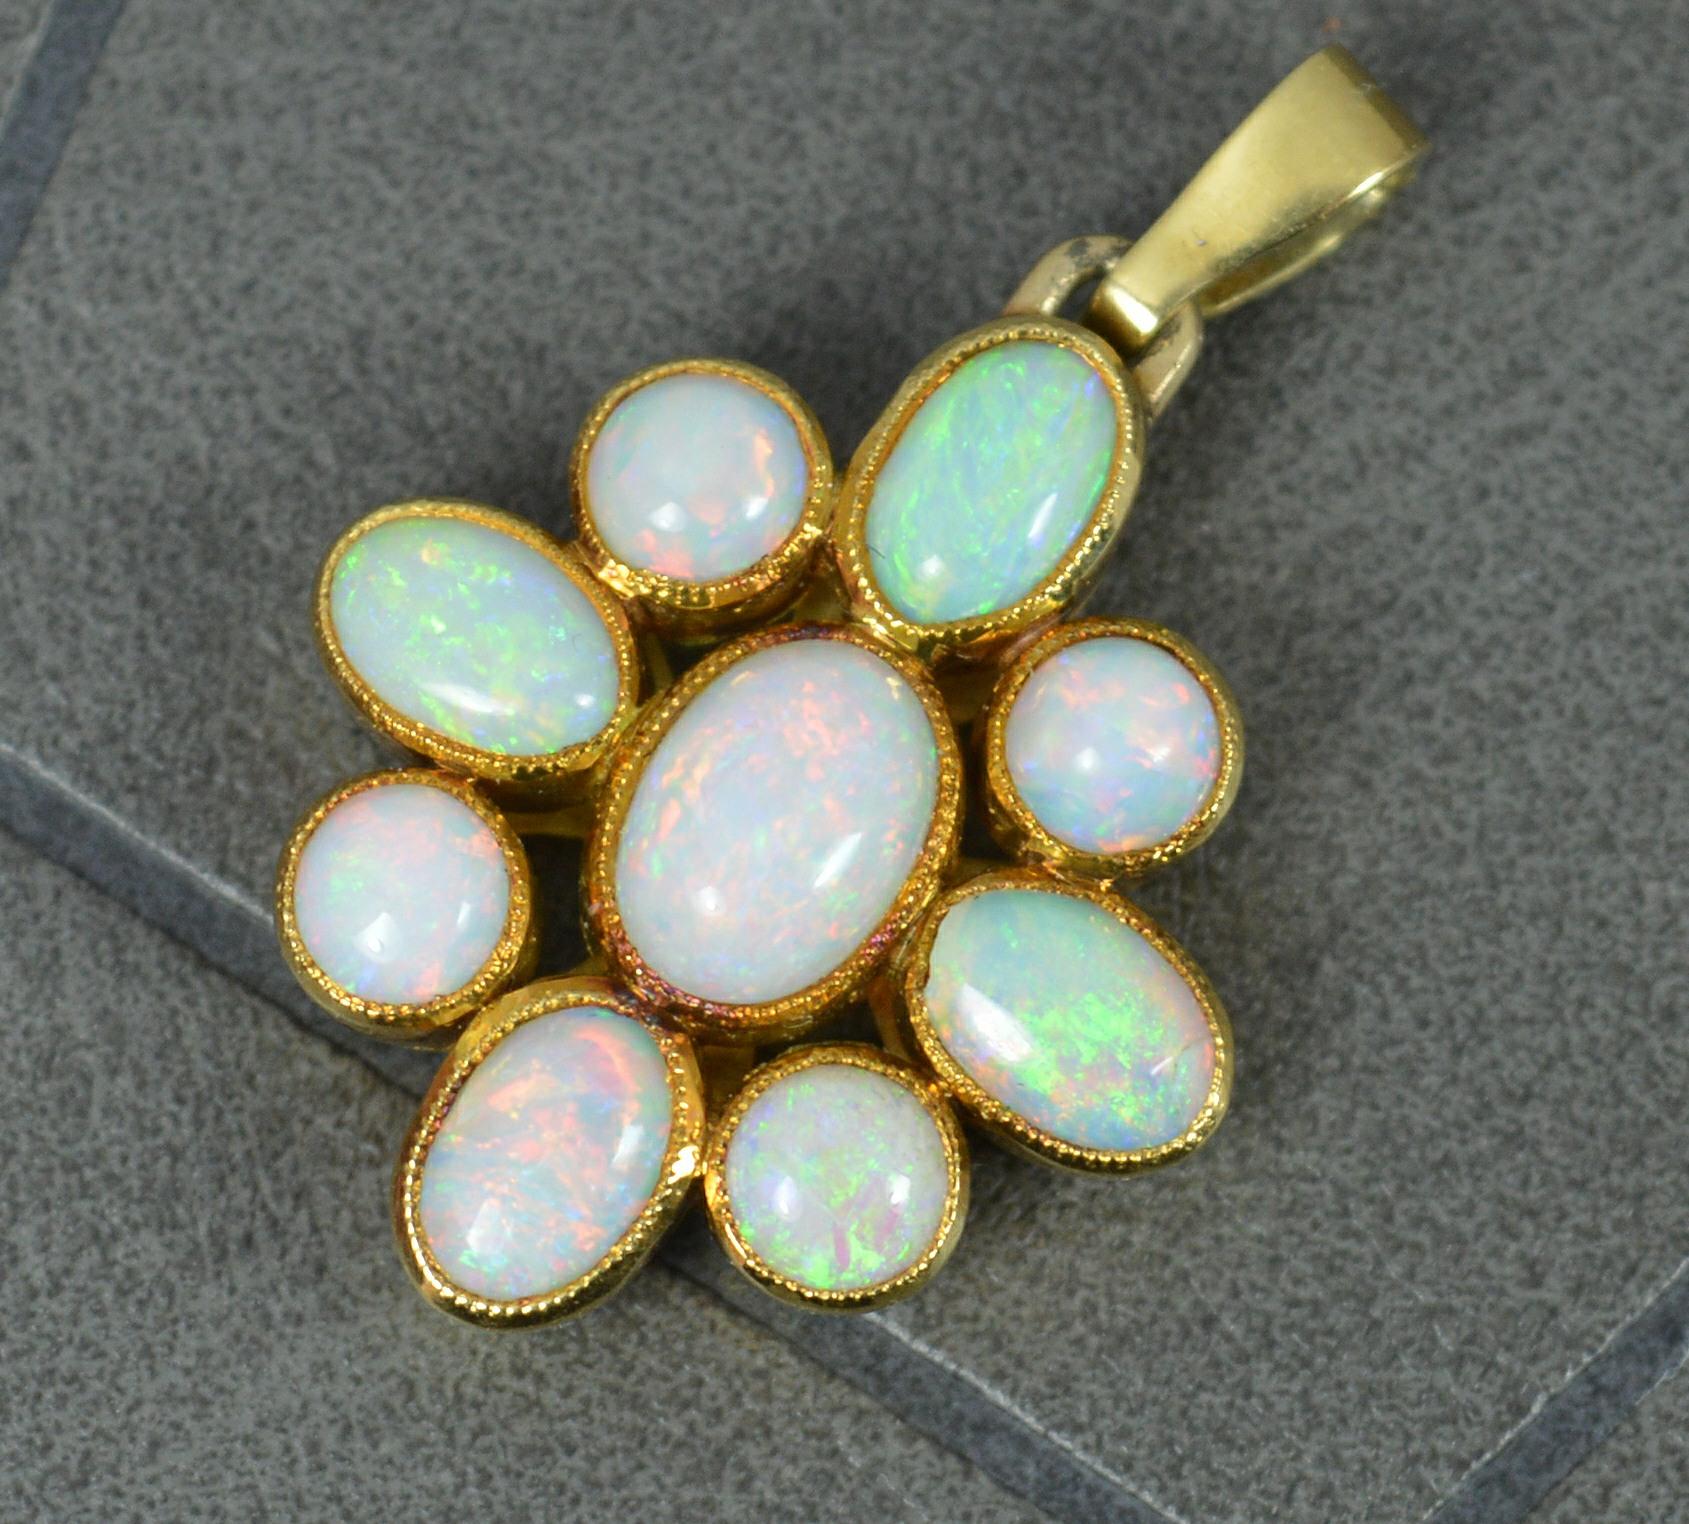 Oval Cut Beautiful 14 Carat Gold and Colourful Natural Opal Pendant